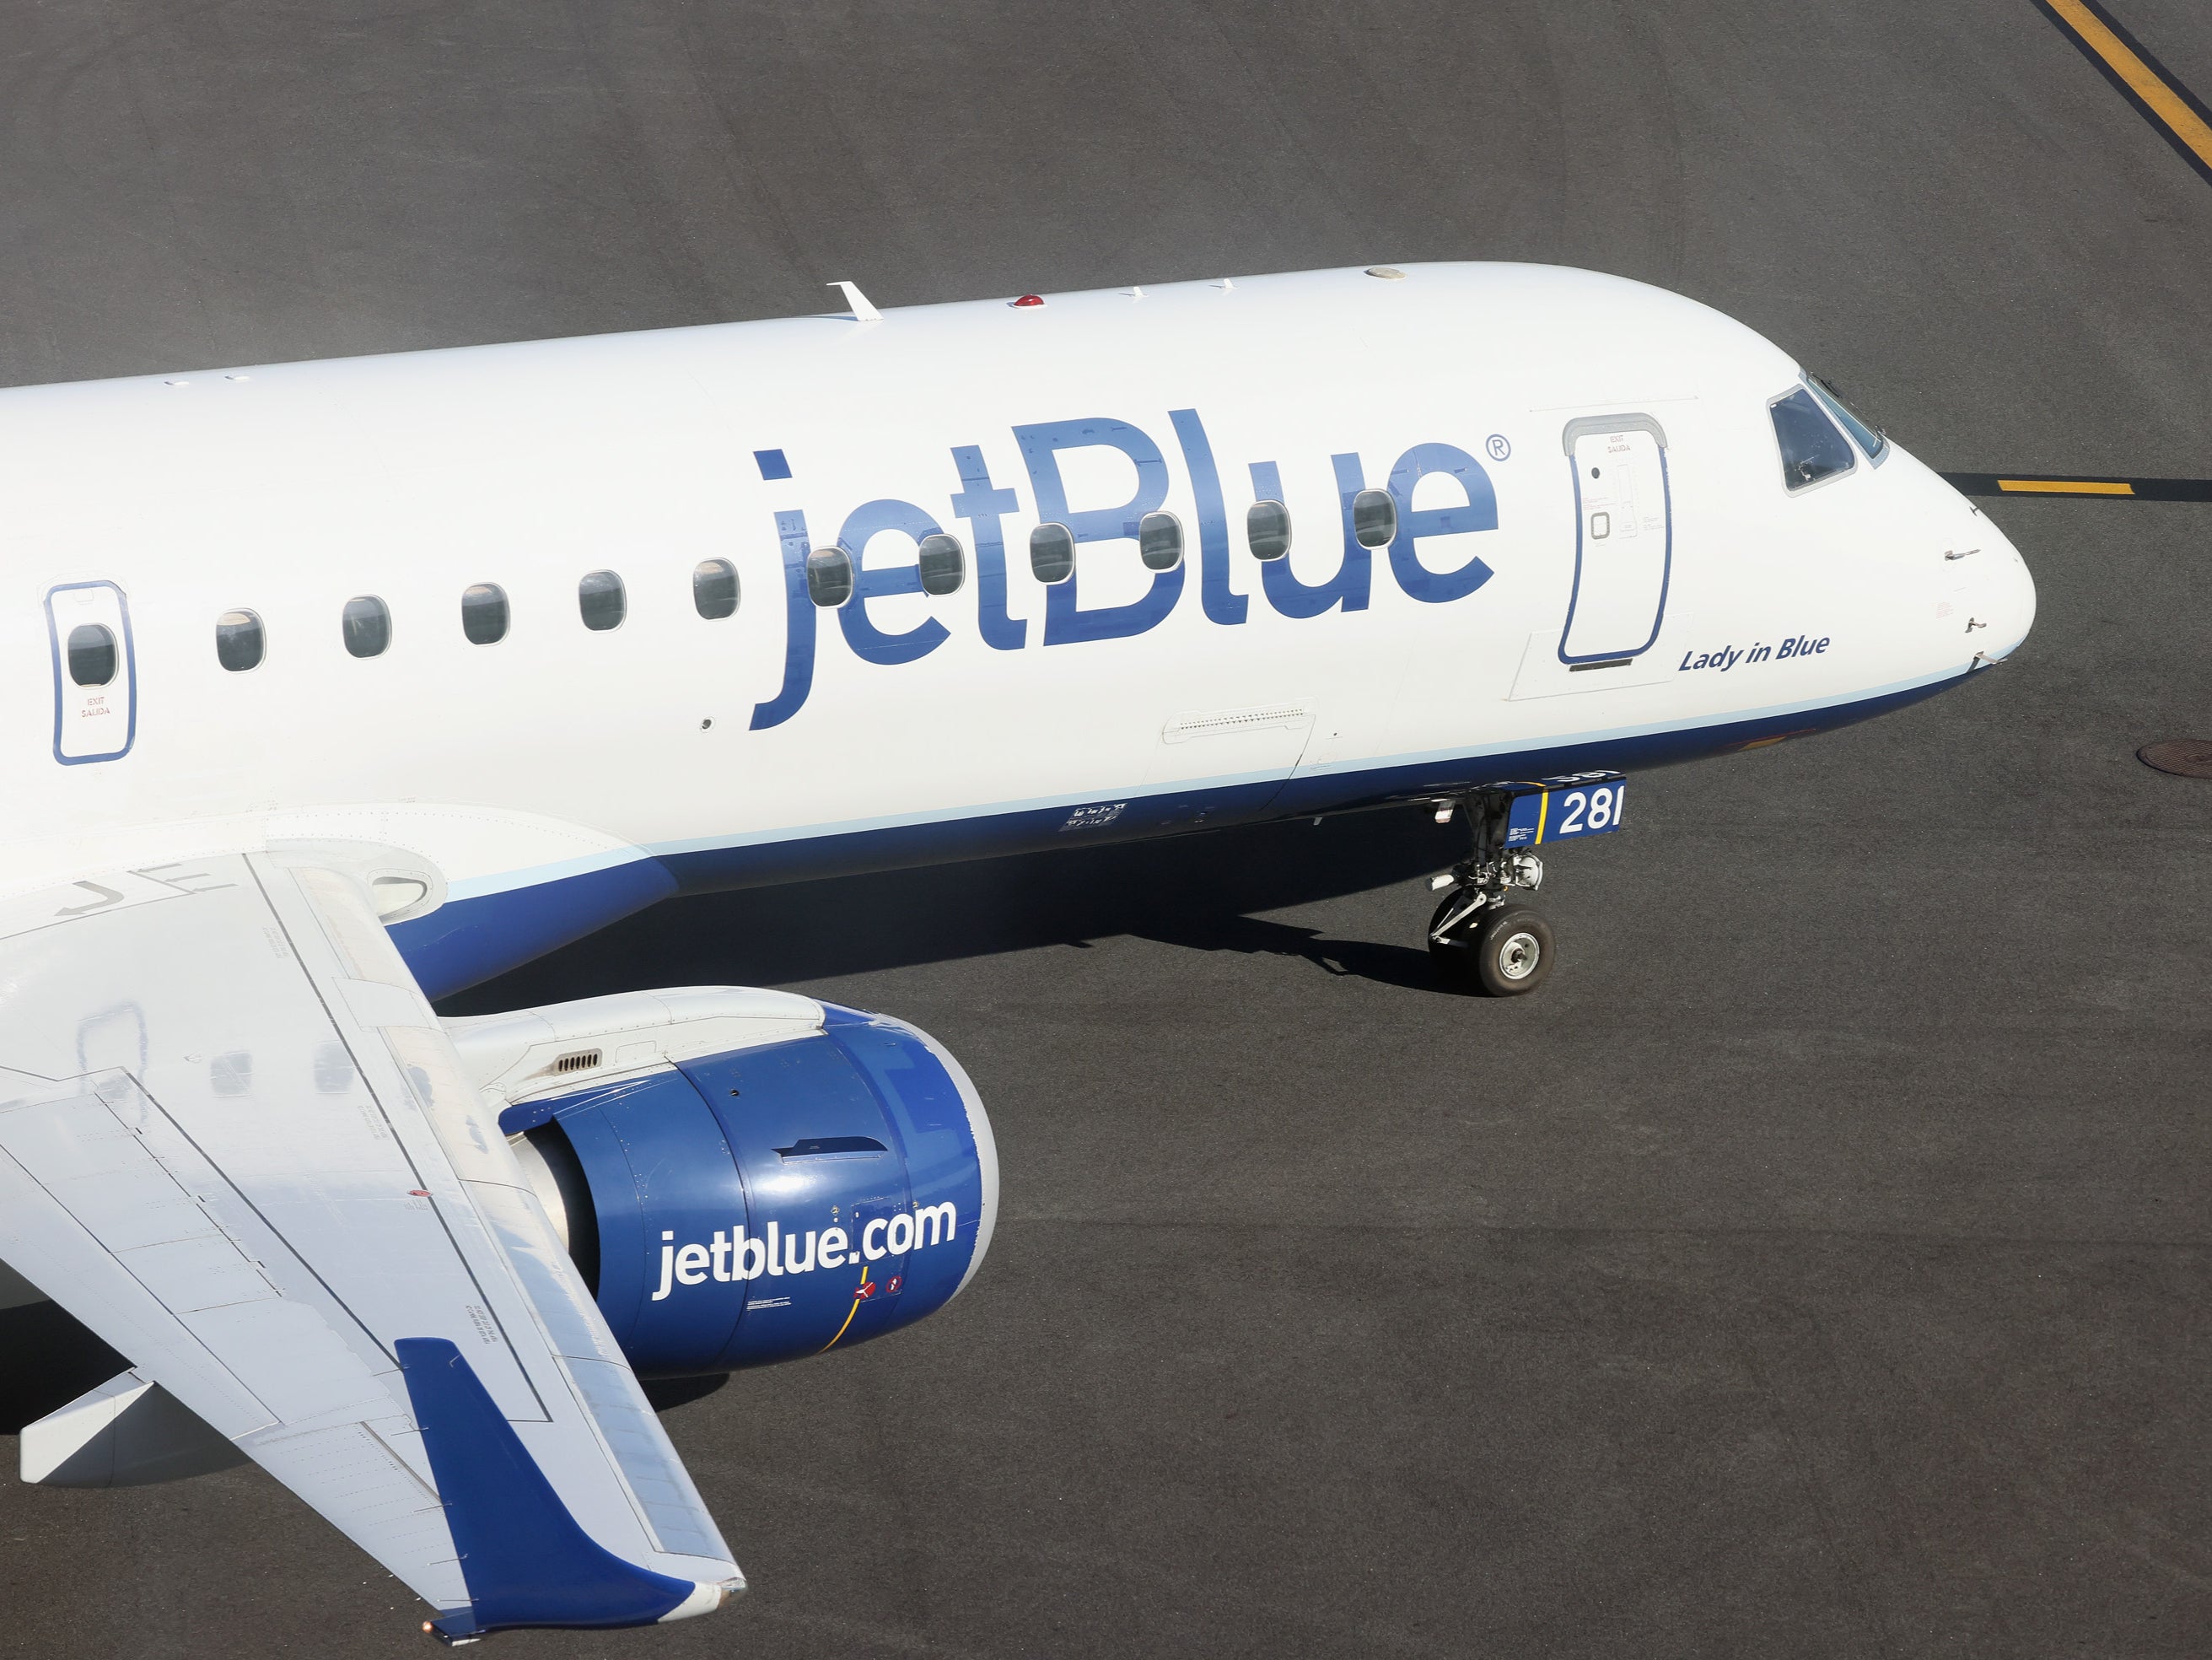 JetBlue thanked the passengers’ assistance in this incident